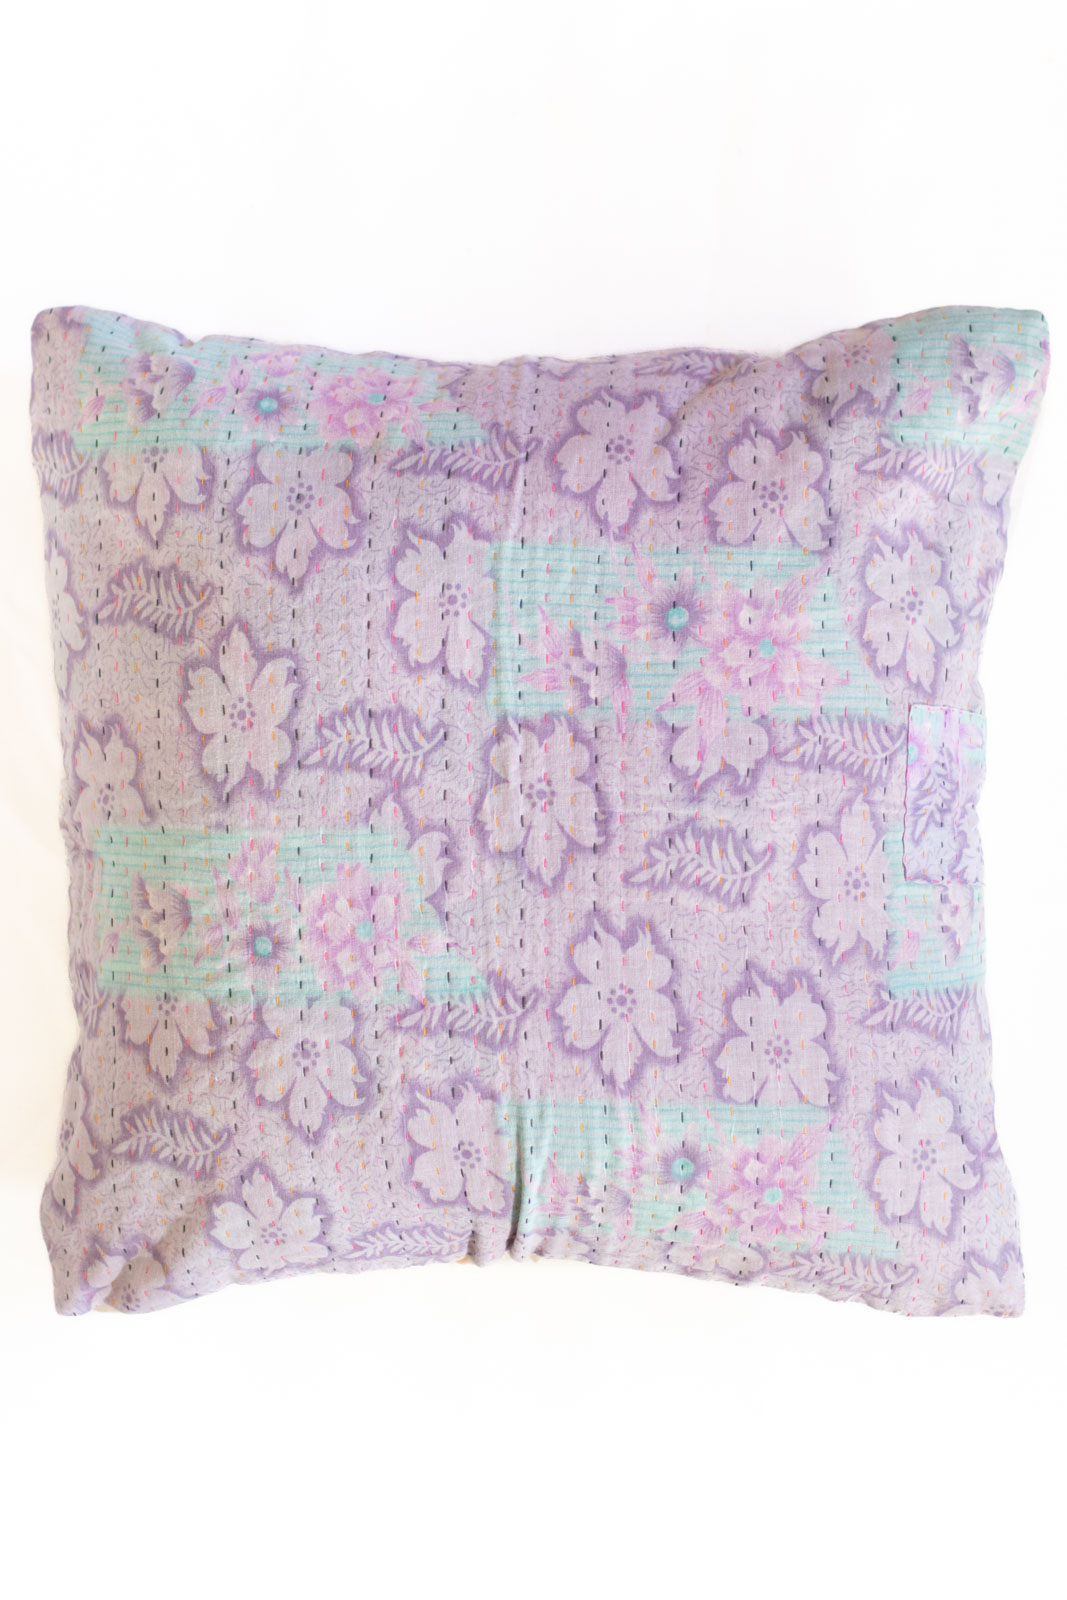 Marvelous no. 3 Kantha Pillow Cover